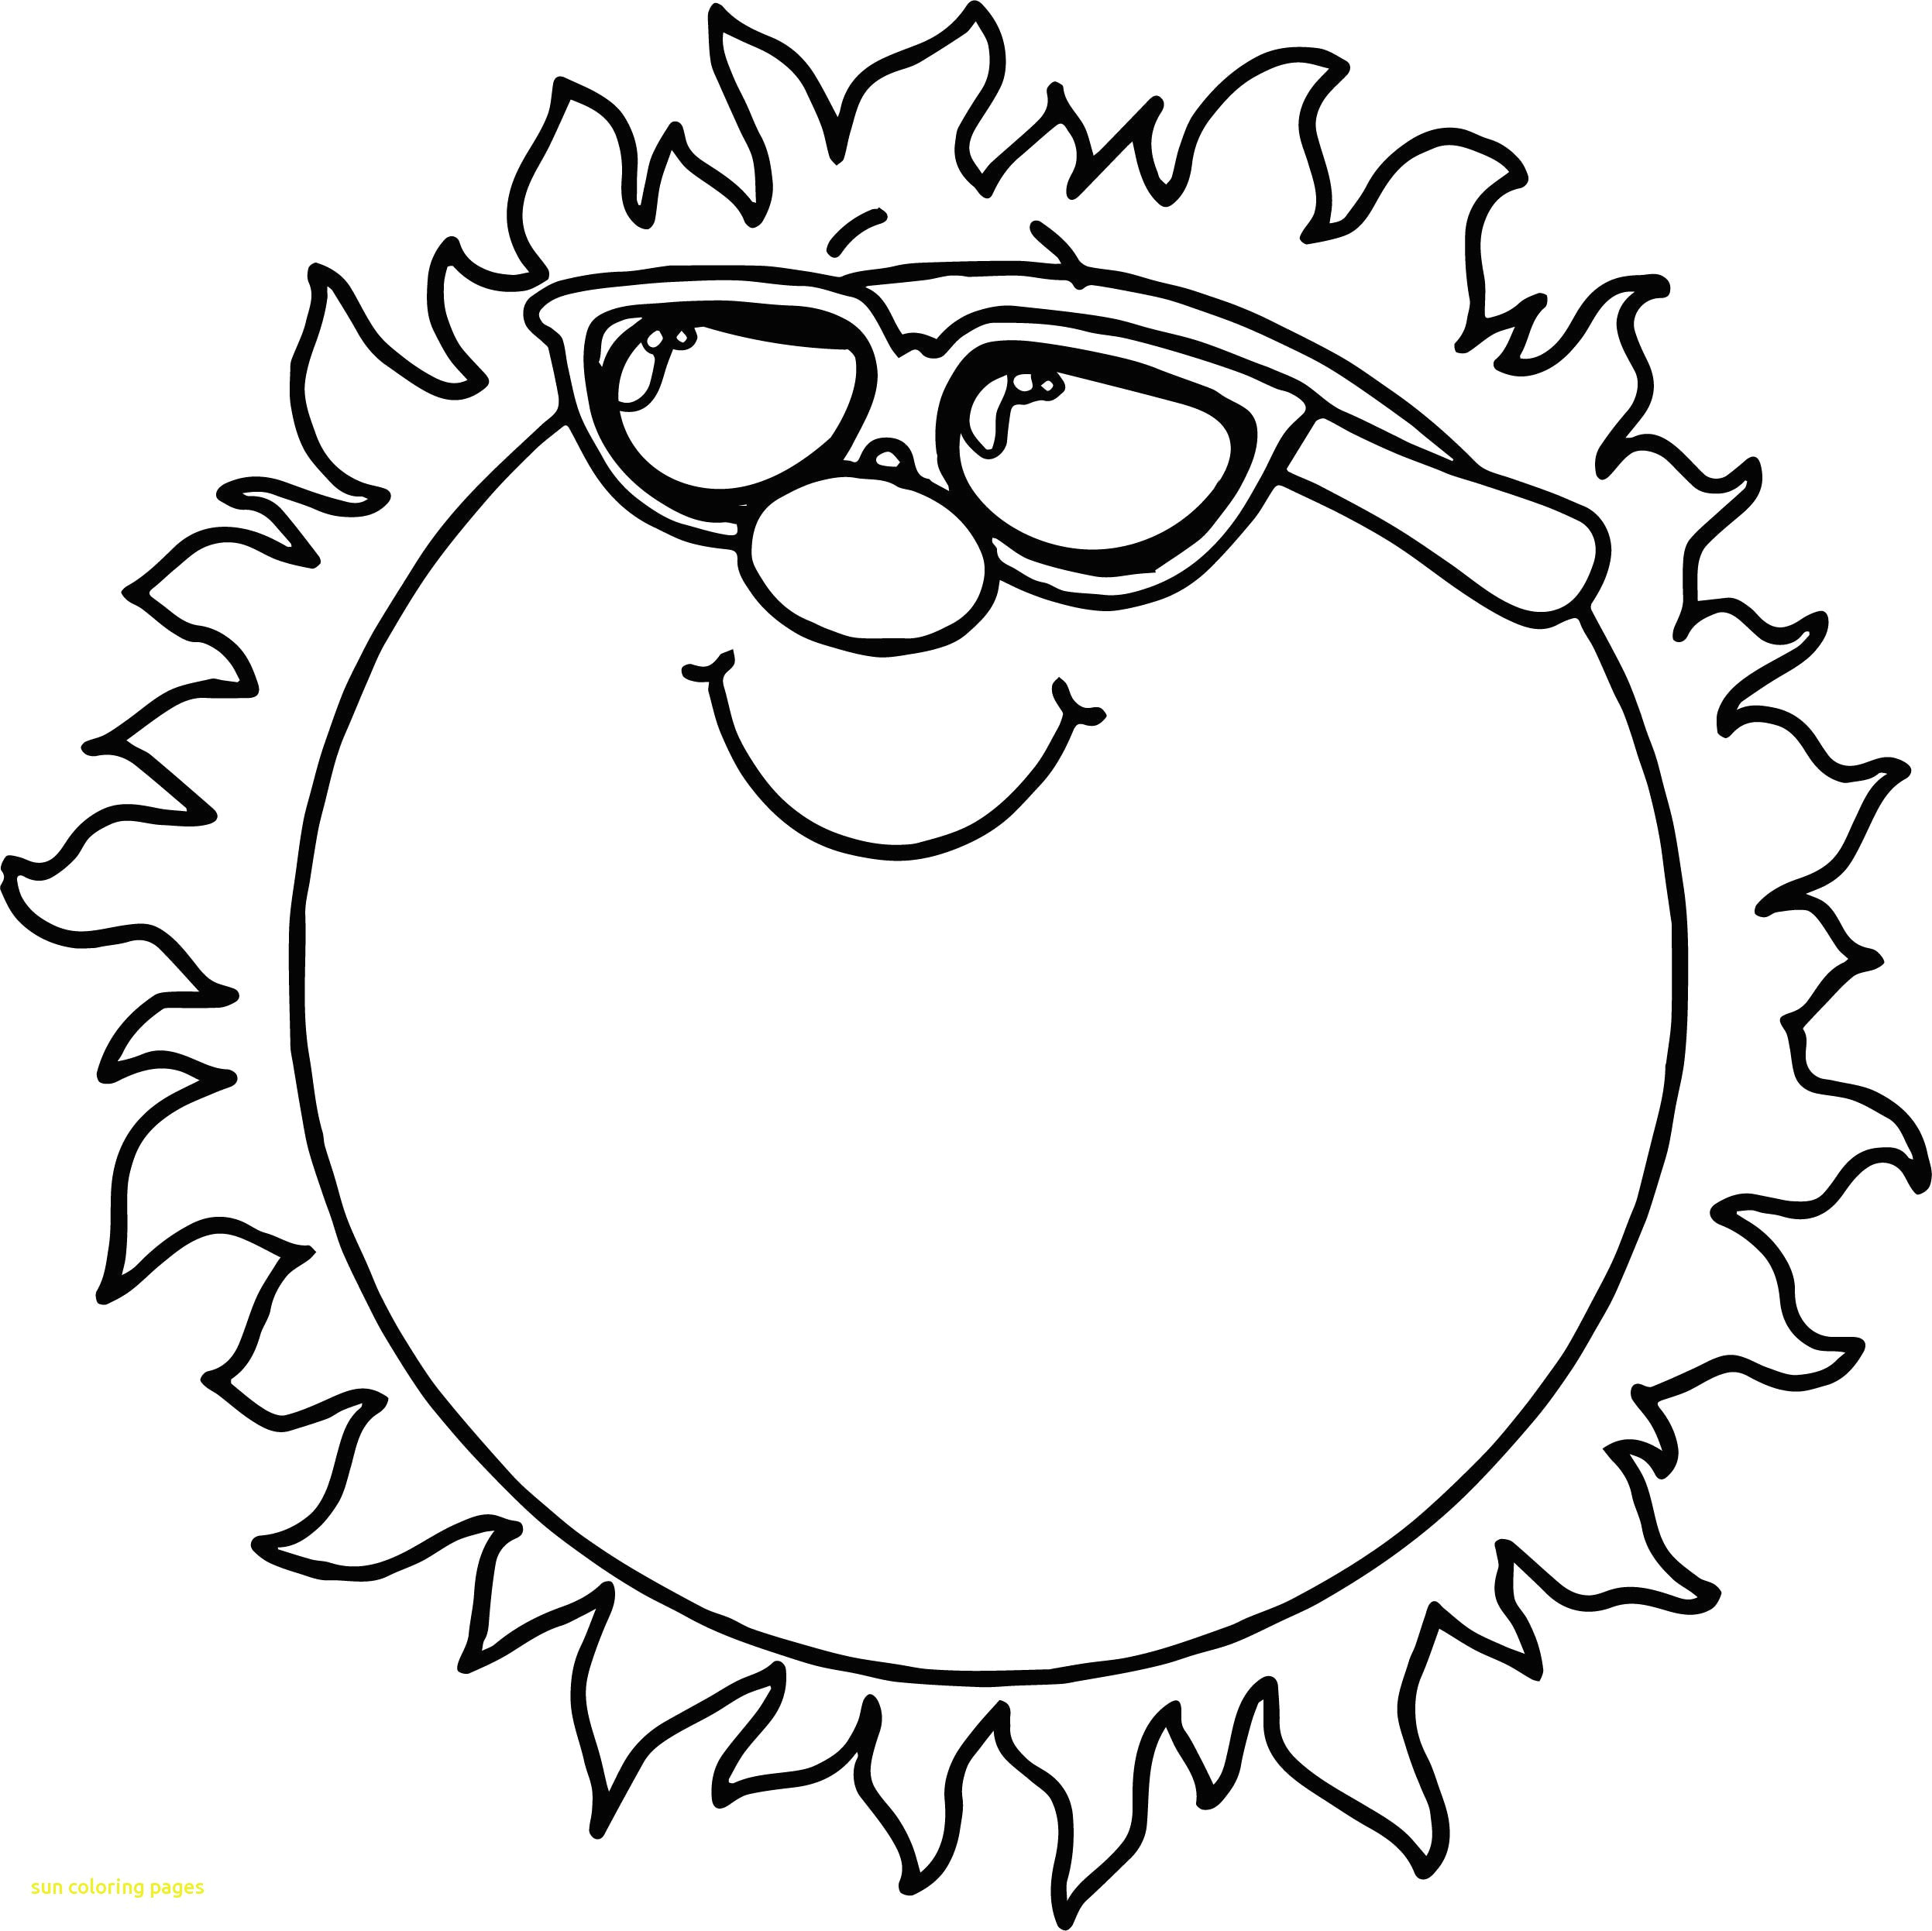 fox crafts for preschoolers beautiful drawing for kids new printable sun colouring 31 for preschoolers 0d